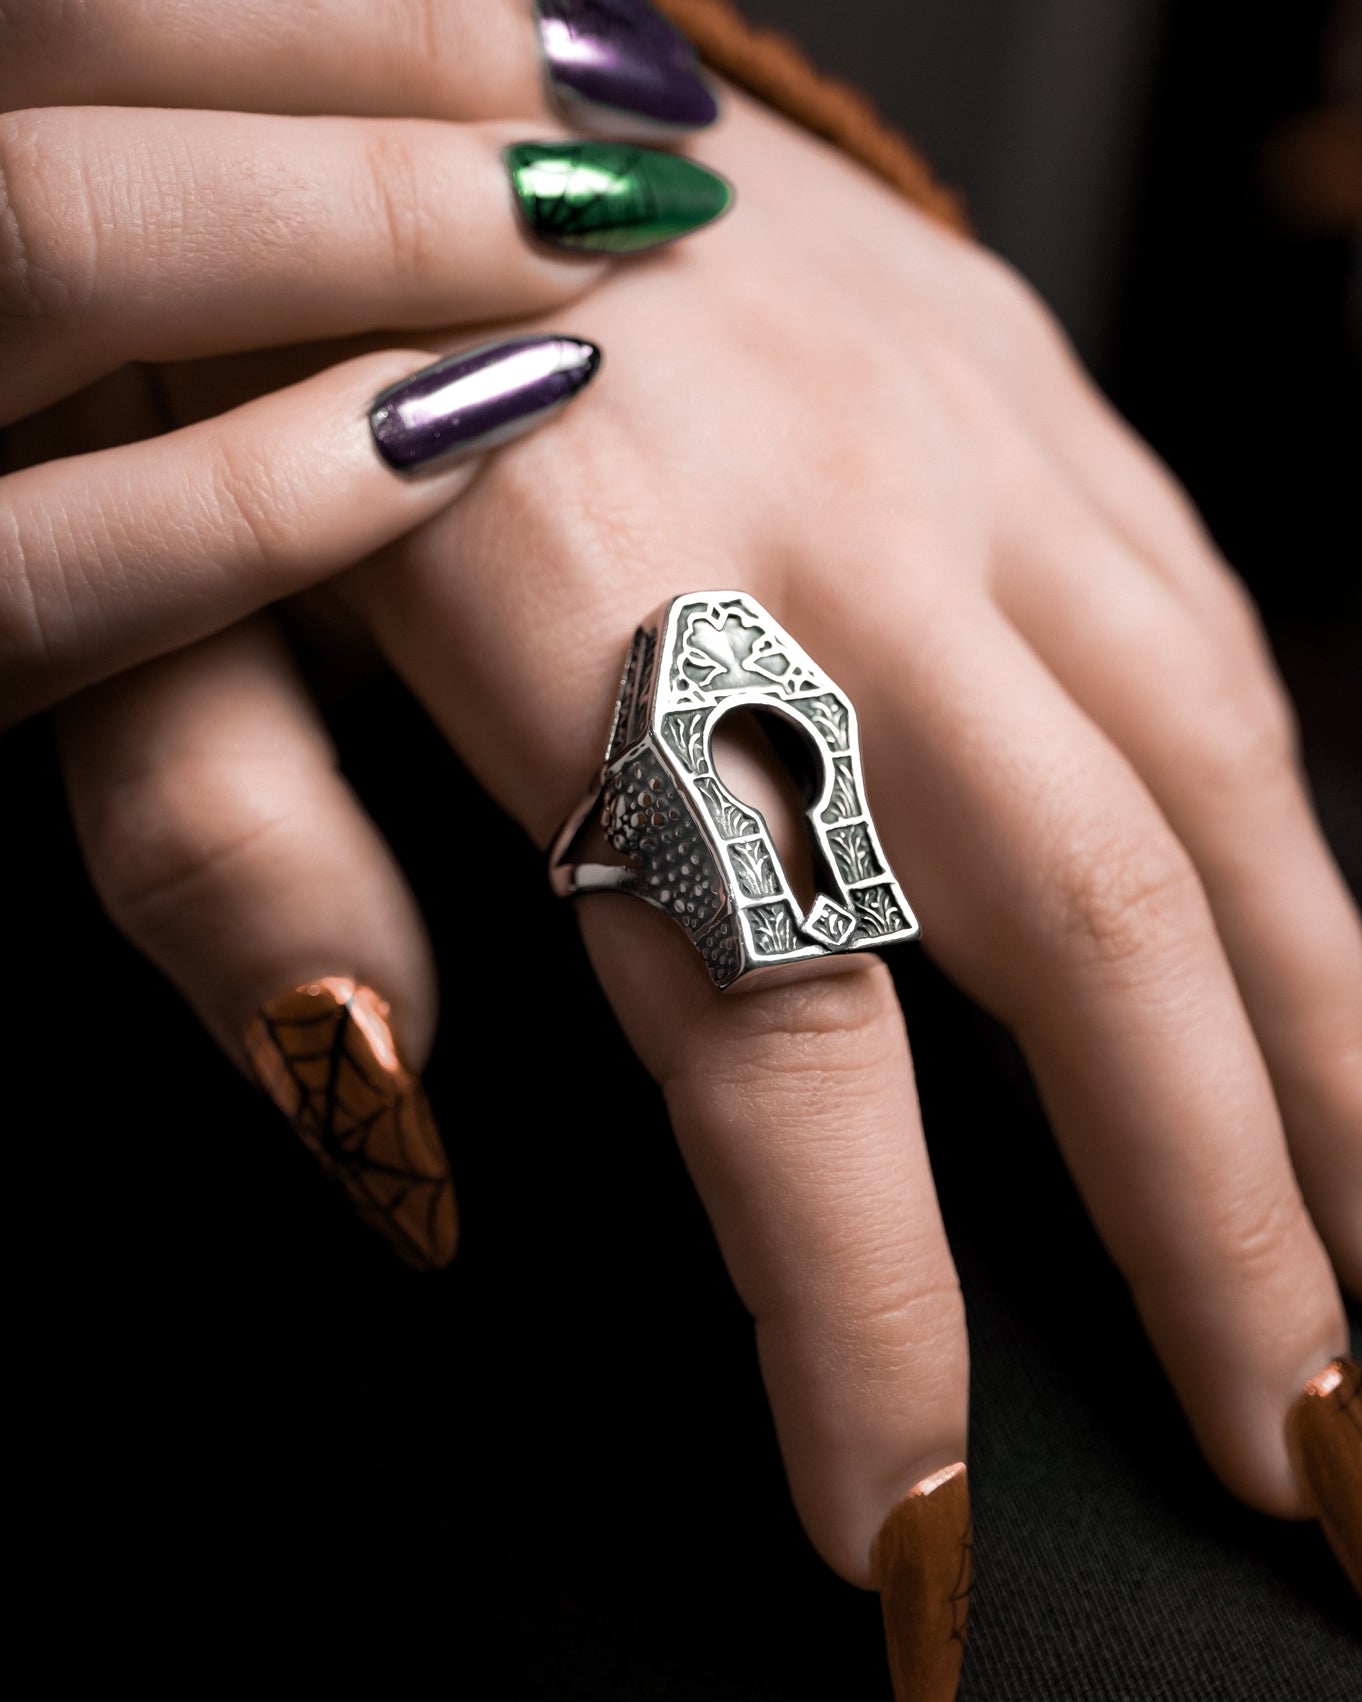 Model wearing large gravestone shaped stainless steel ring with filigree detailing and a keyhole detail in the middle. Shown from a left side angle